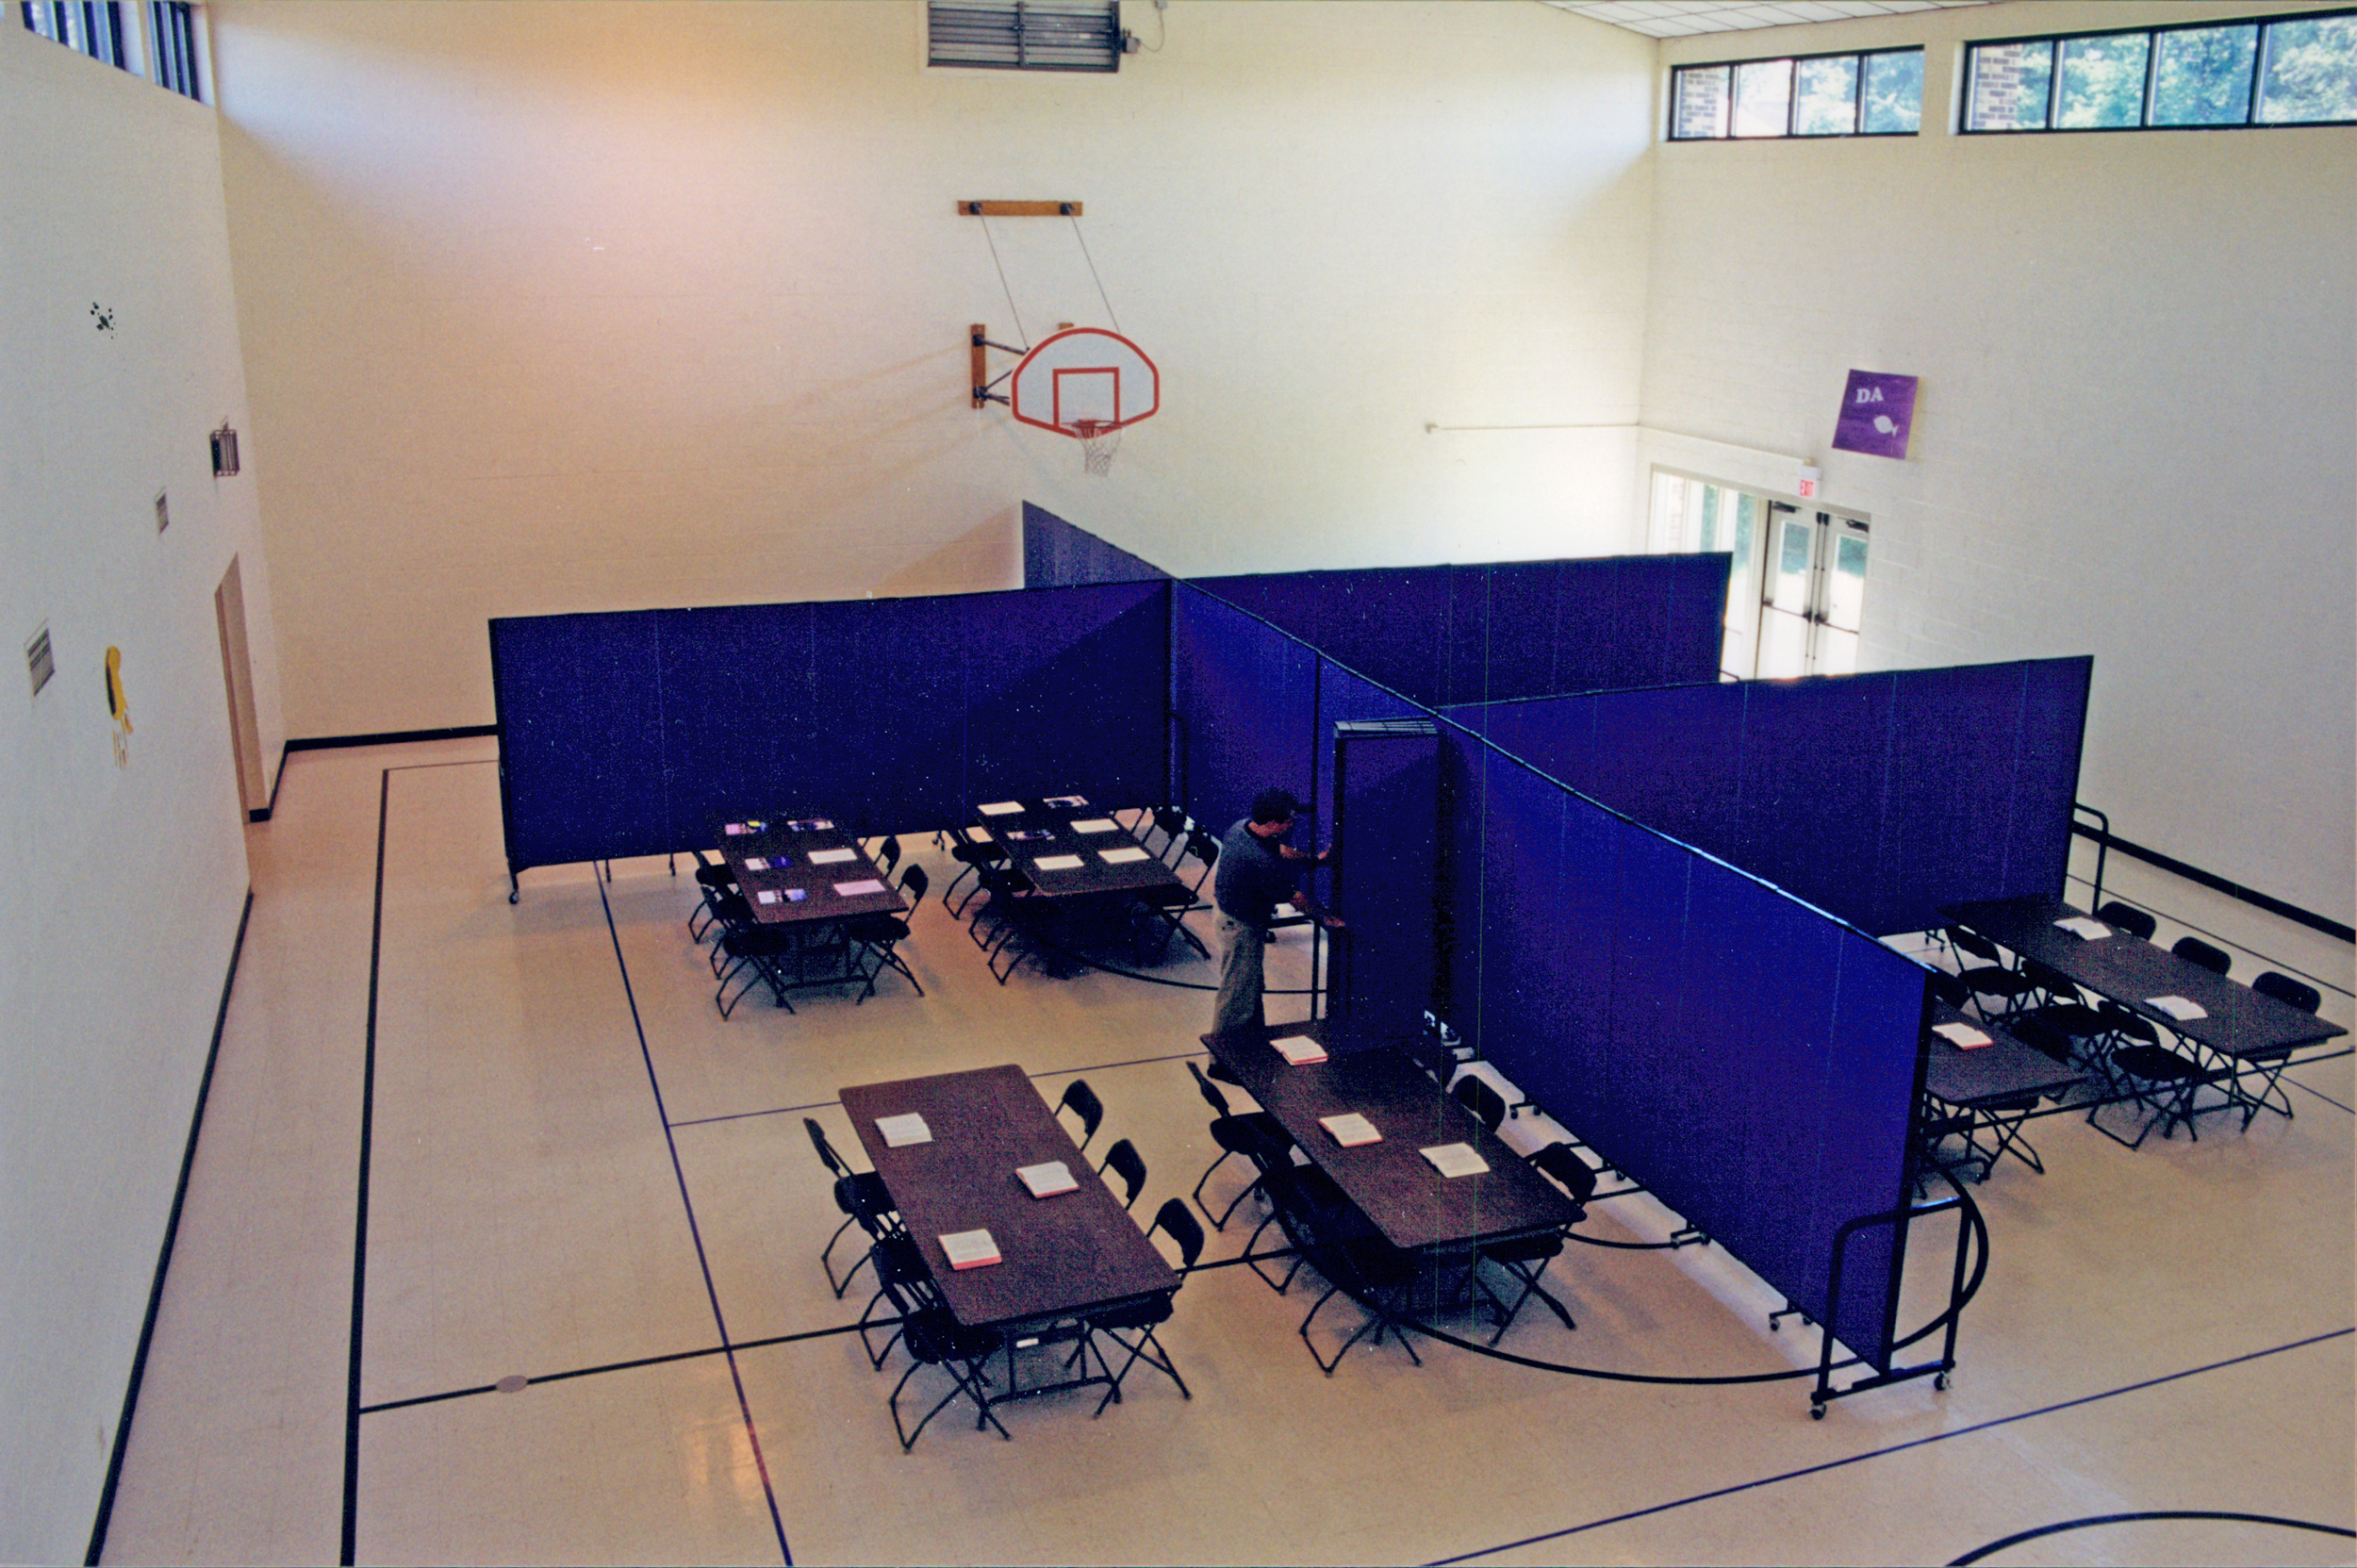 A third 13'-1" long divider has been put in place along with the tables and chairs